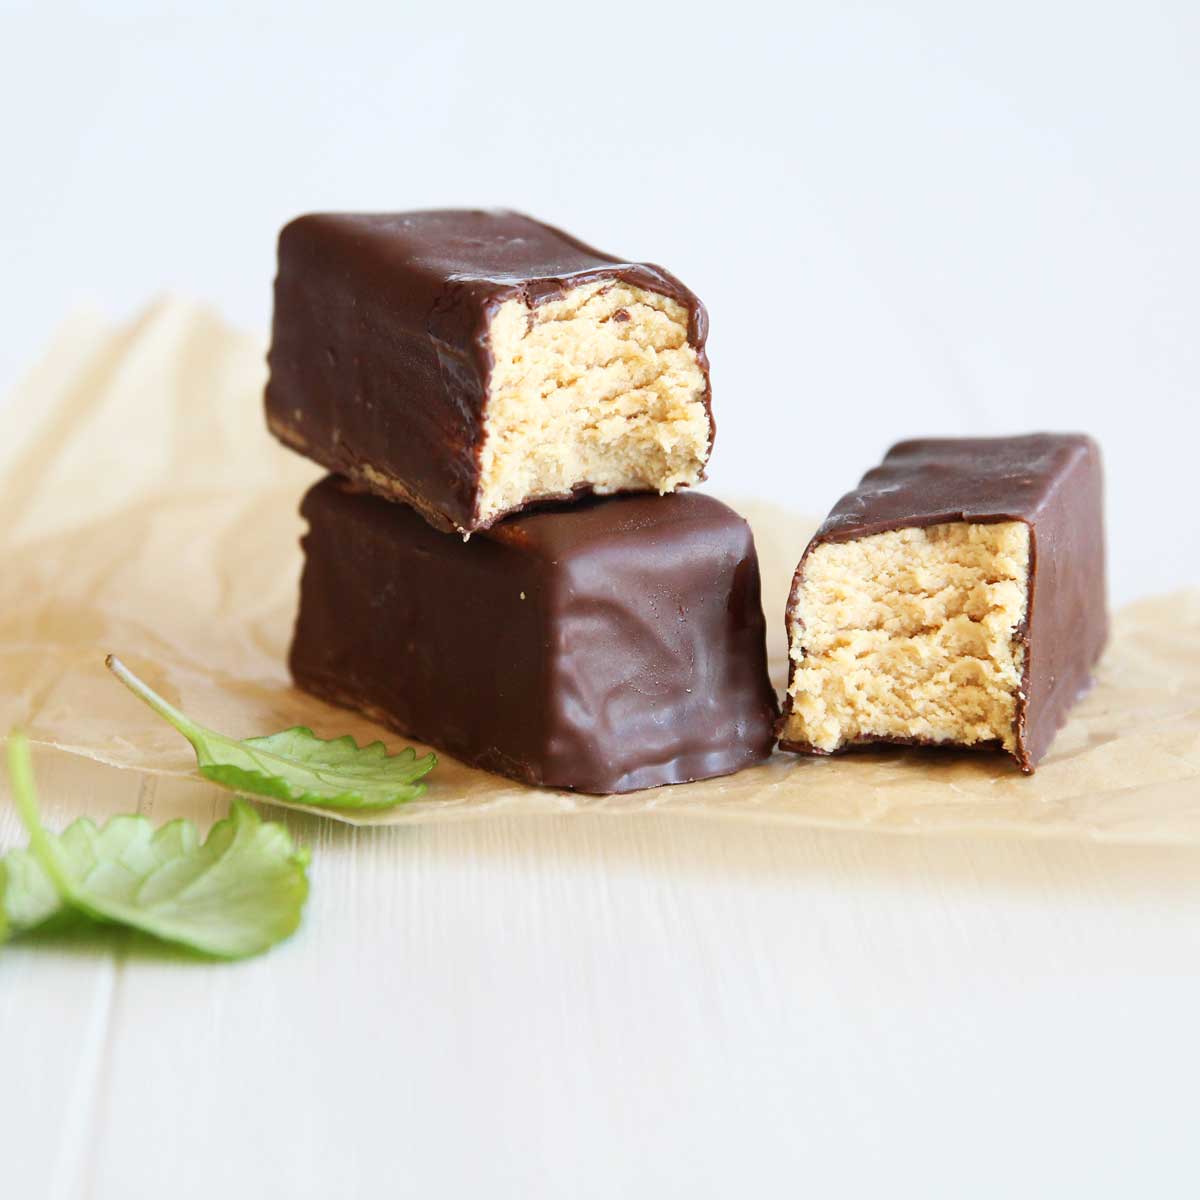 Simple Greek Yogurt Peanut Butter Protein Bars to eat for Breakfast or Post-Workout - birthday cake protein bars